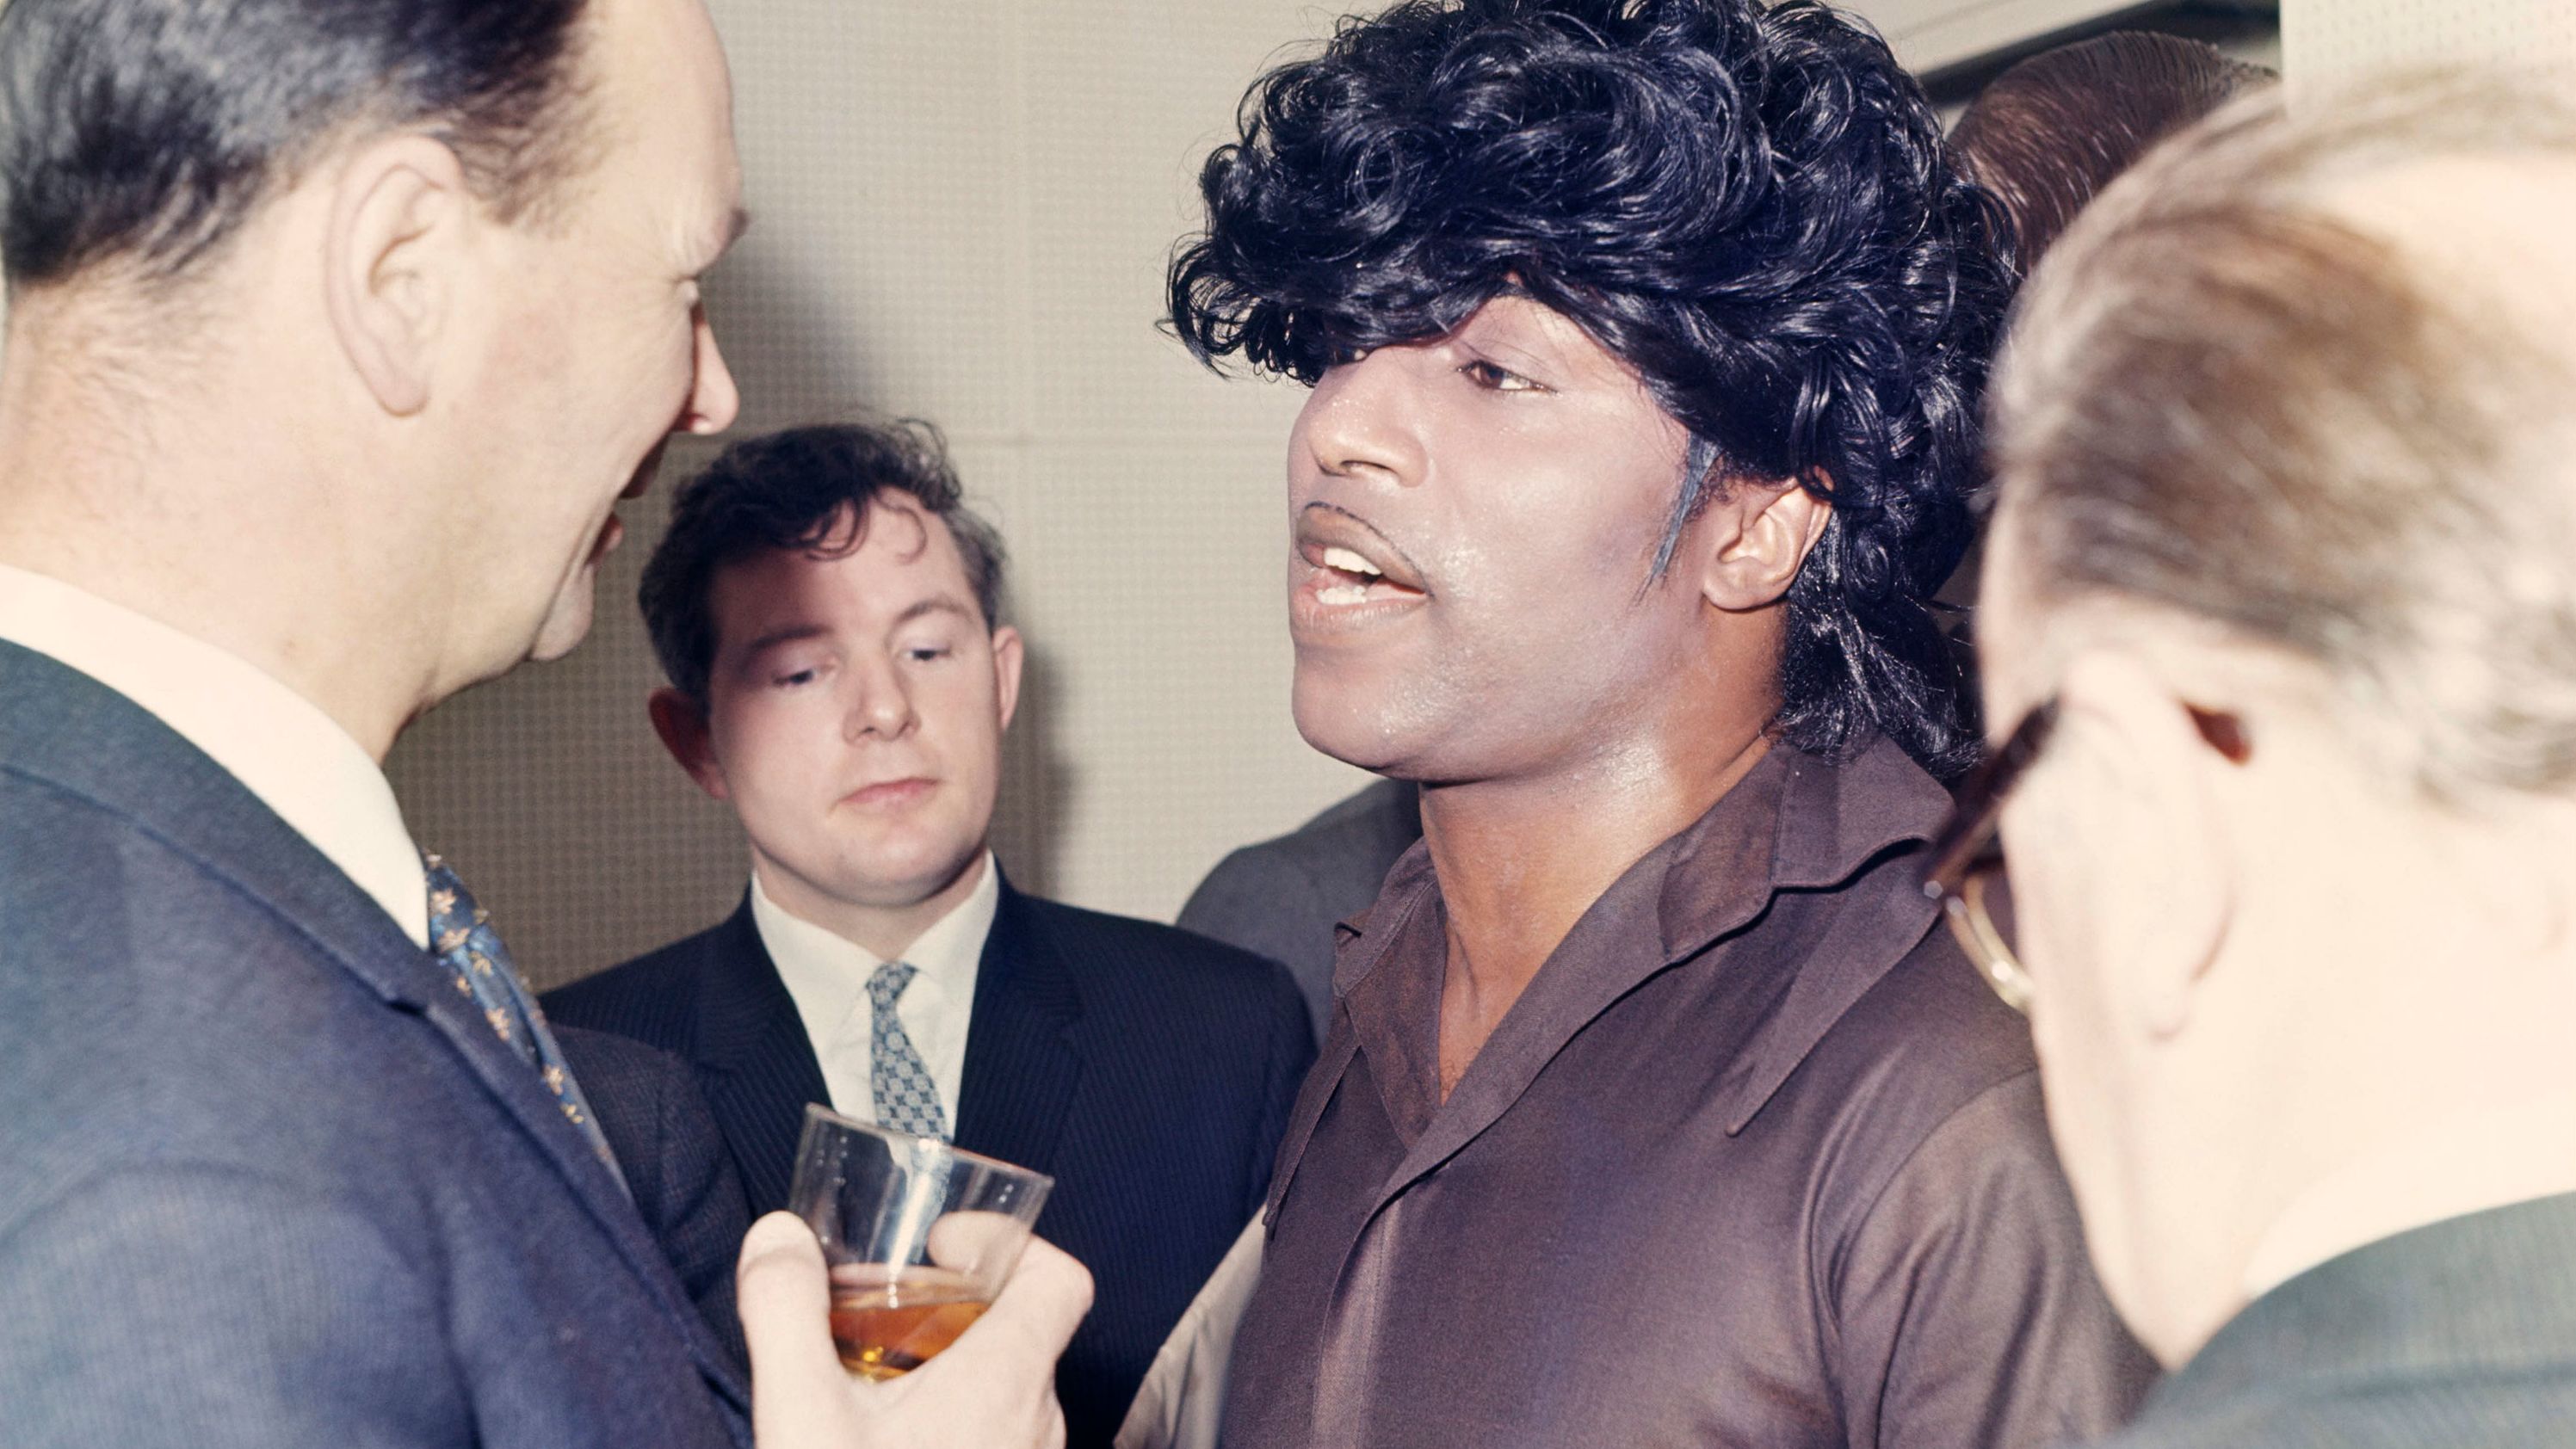 Little Richard speaks at a news conference around 1960.